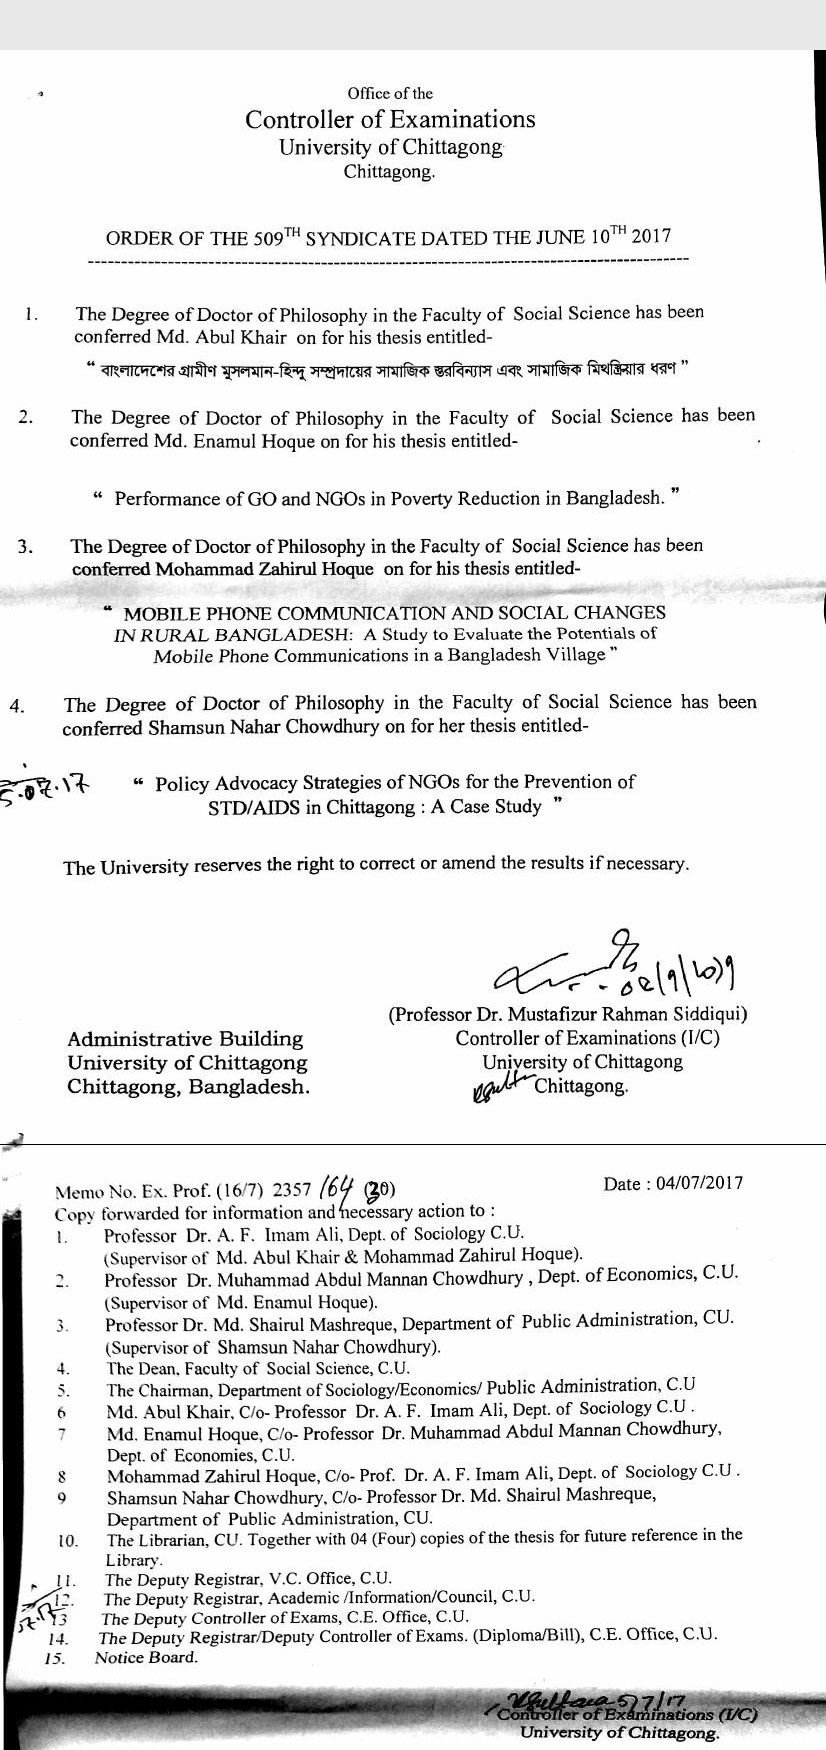 Chittagong University, Order of the 509th Syndicate Dated the June 10th 2017